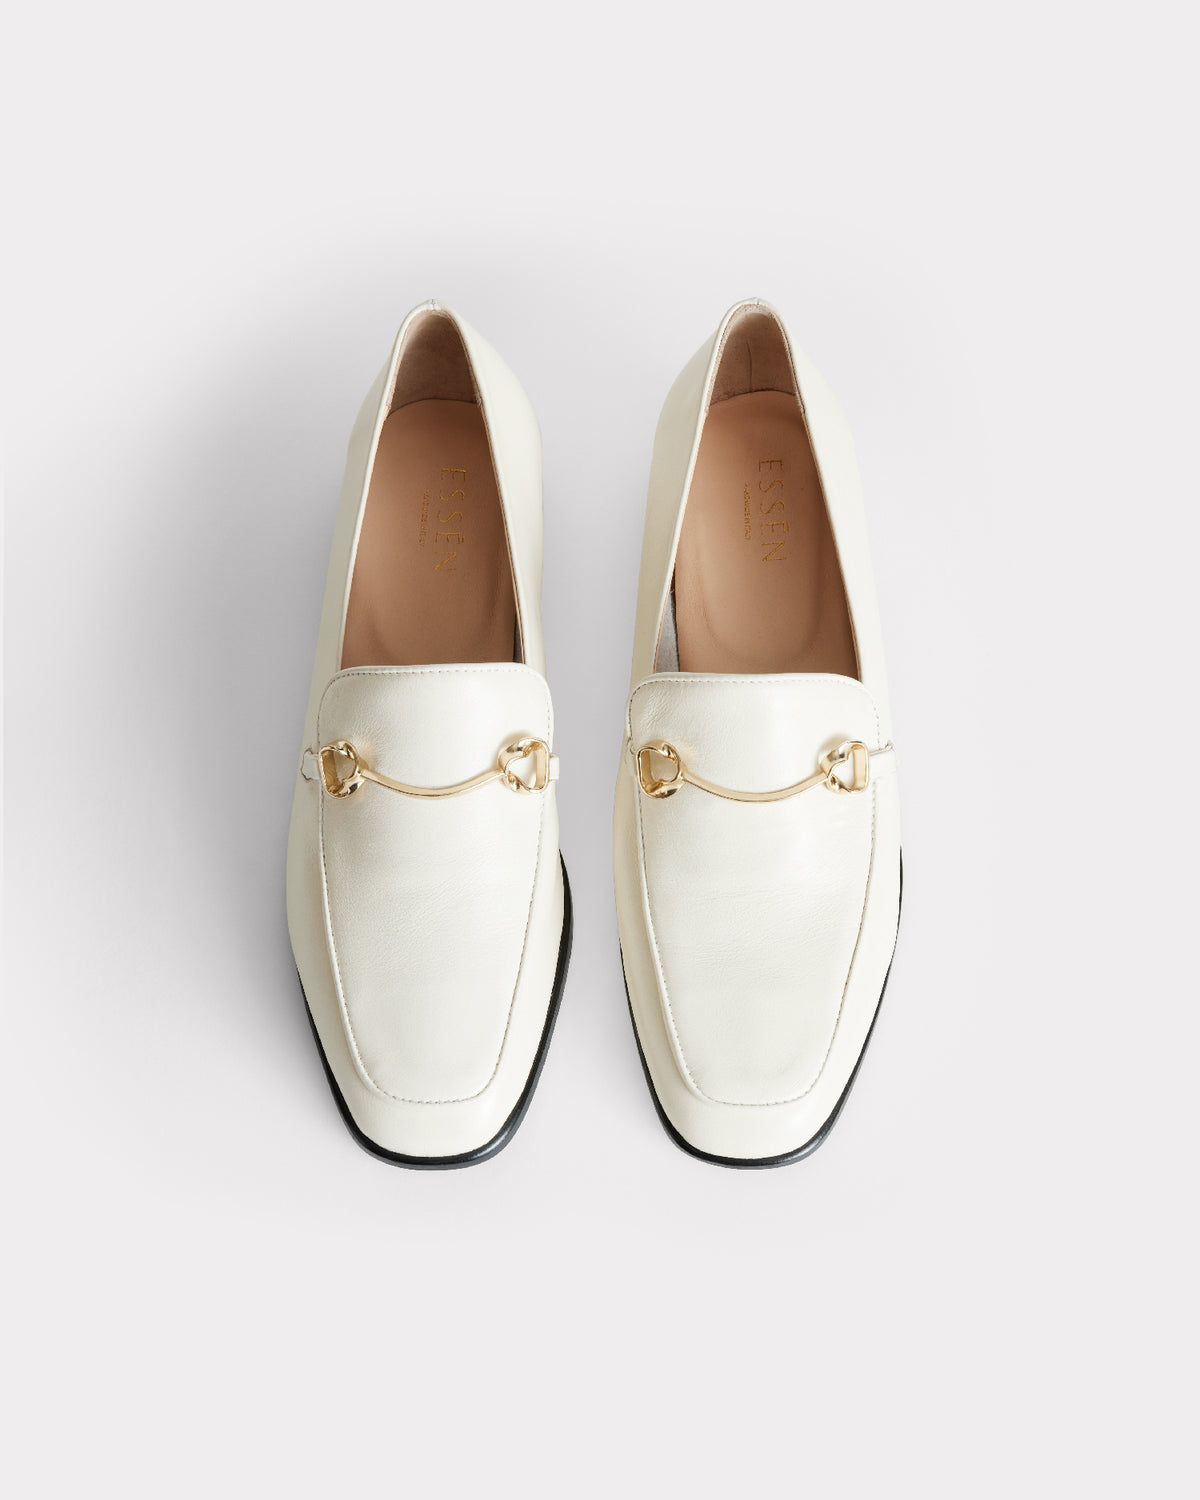 classic white leather loafer made from recycled materials